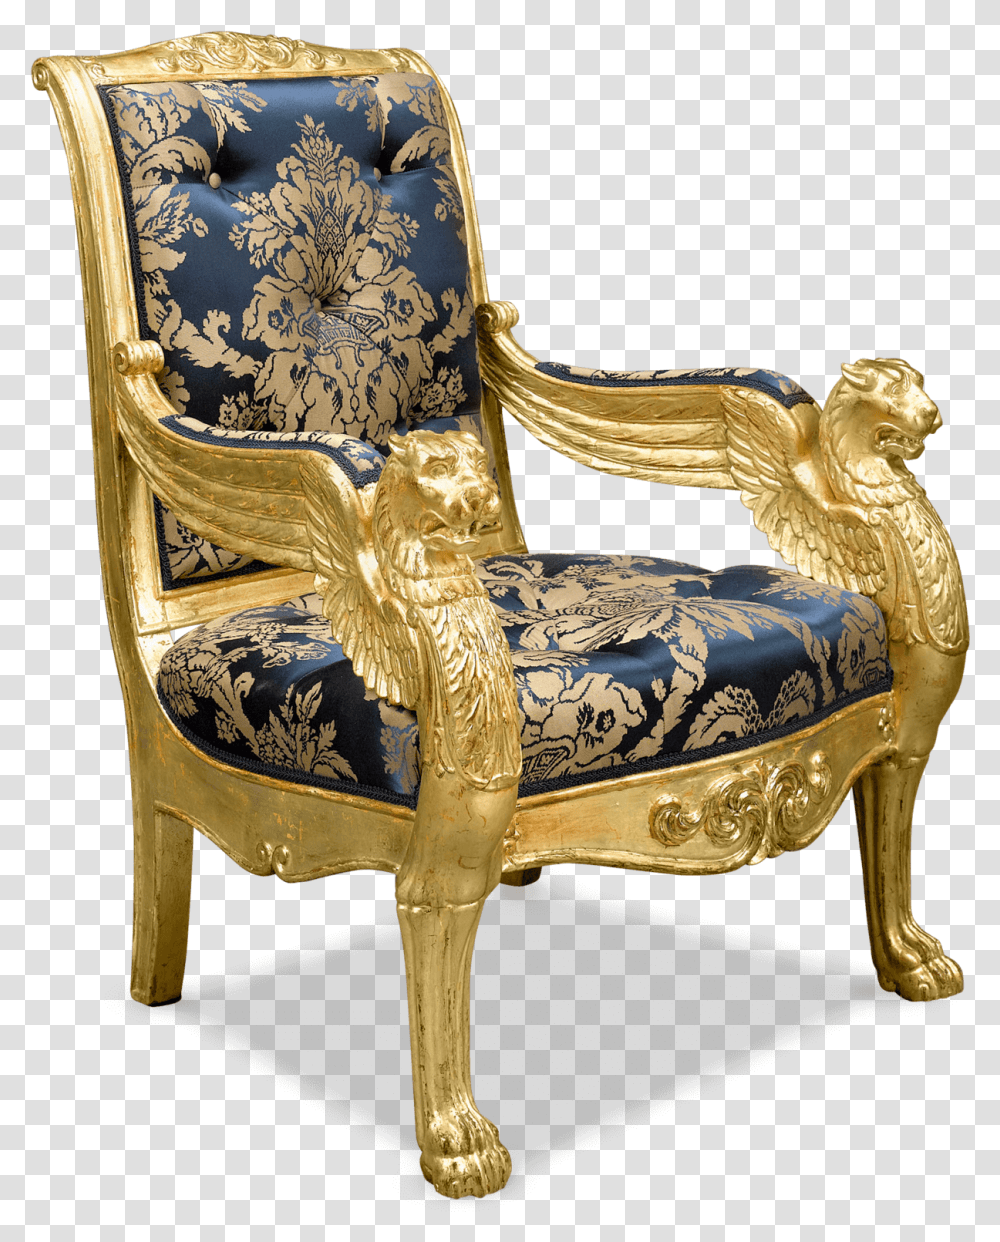 Antique Chairs Lion, Furniture, Armchair, Throne Transparent Png